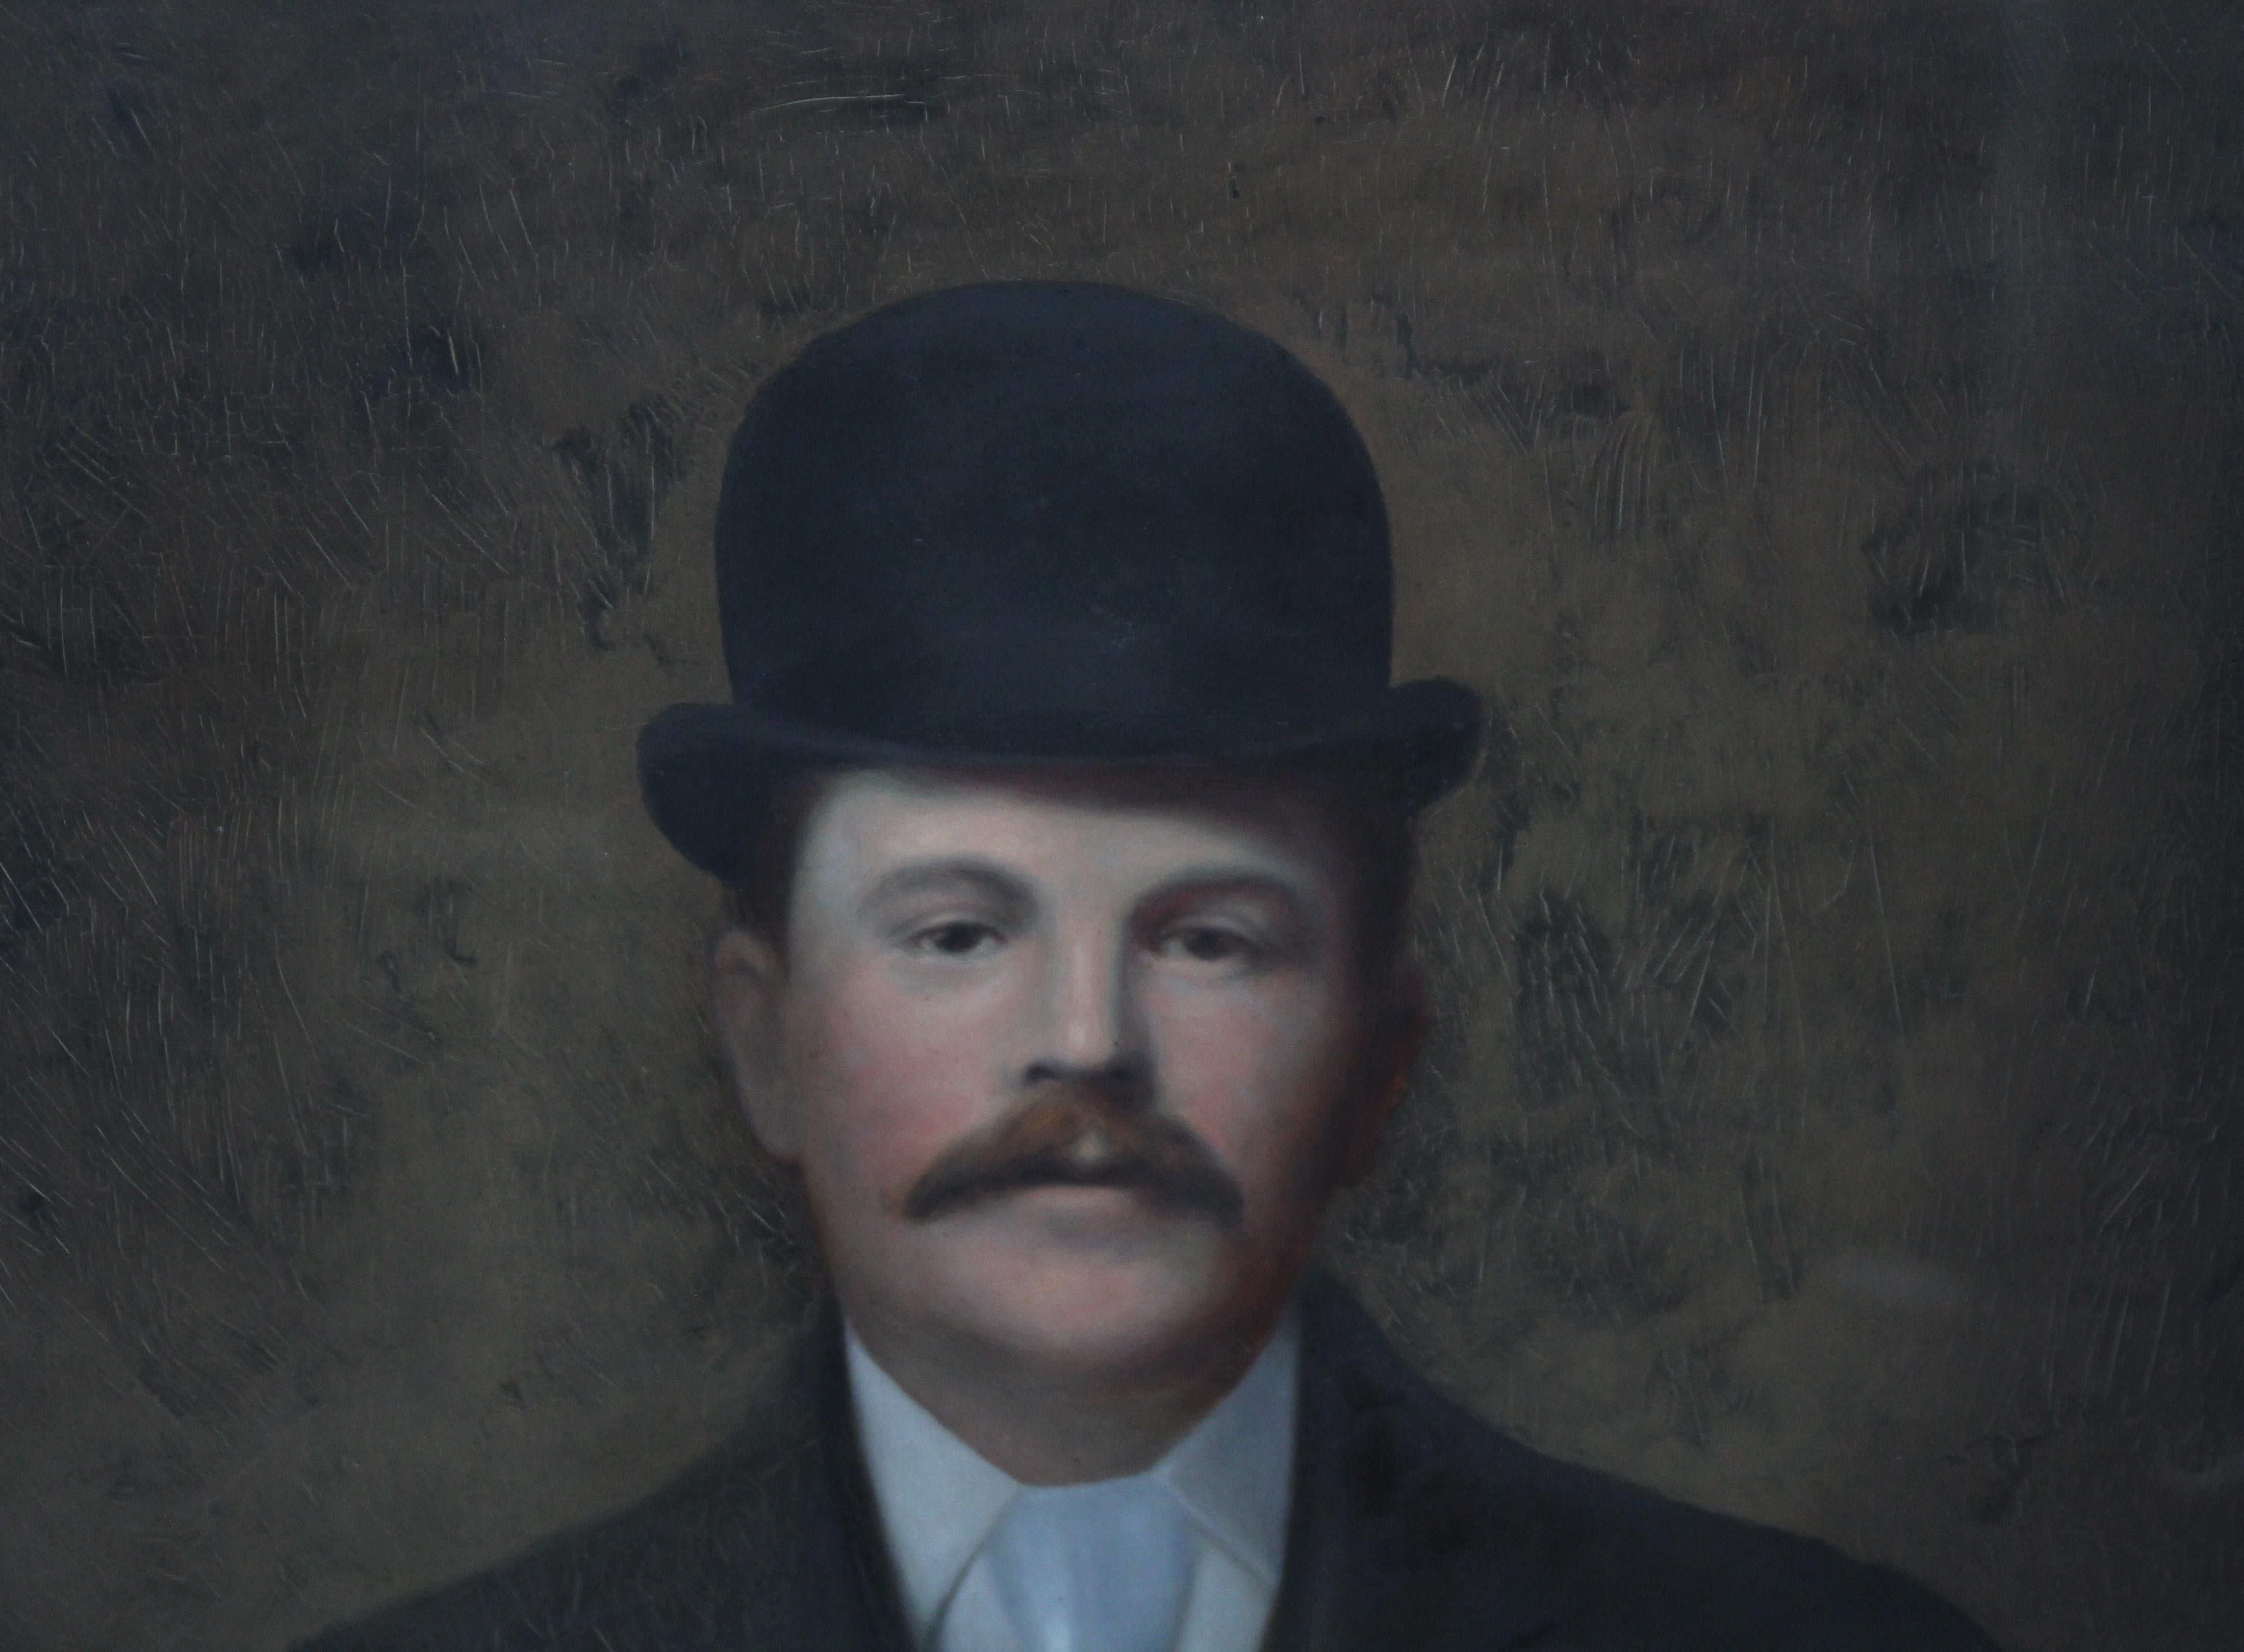 Portrait of a Gentleman in a Bowler Hat - British late 19th century art For Sale 2